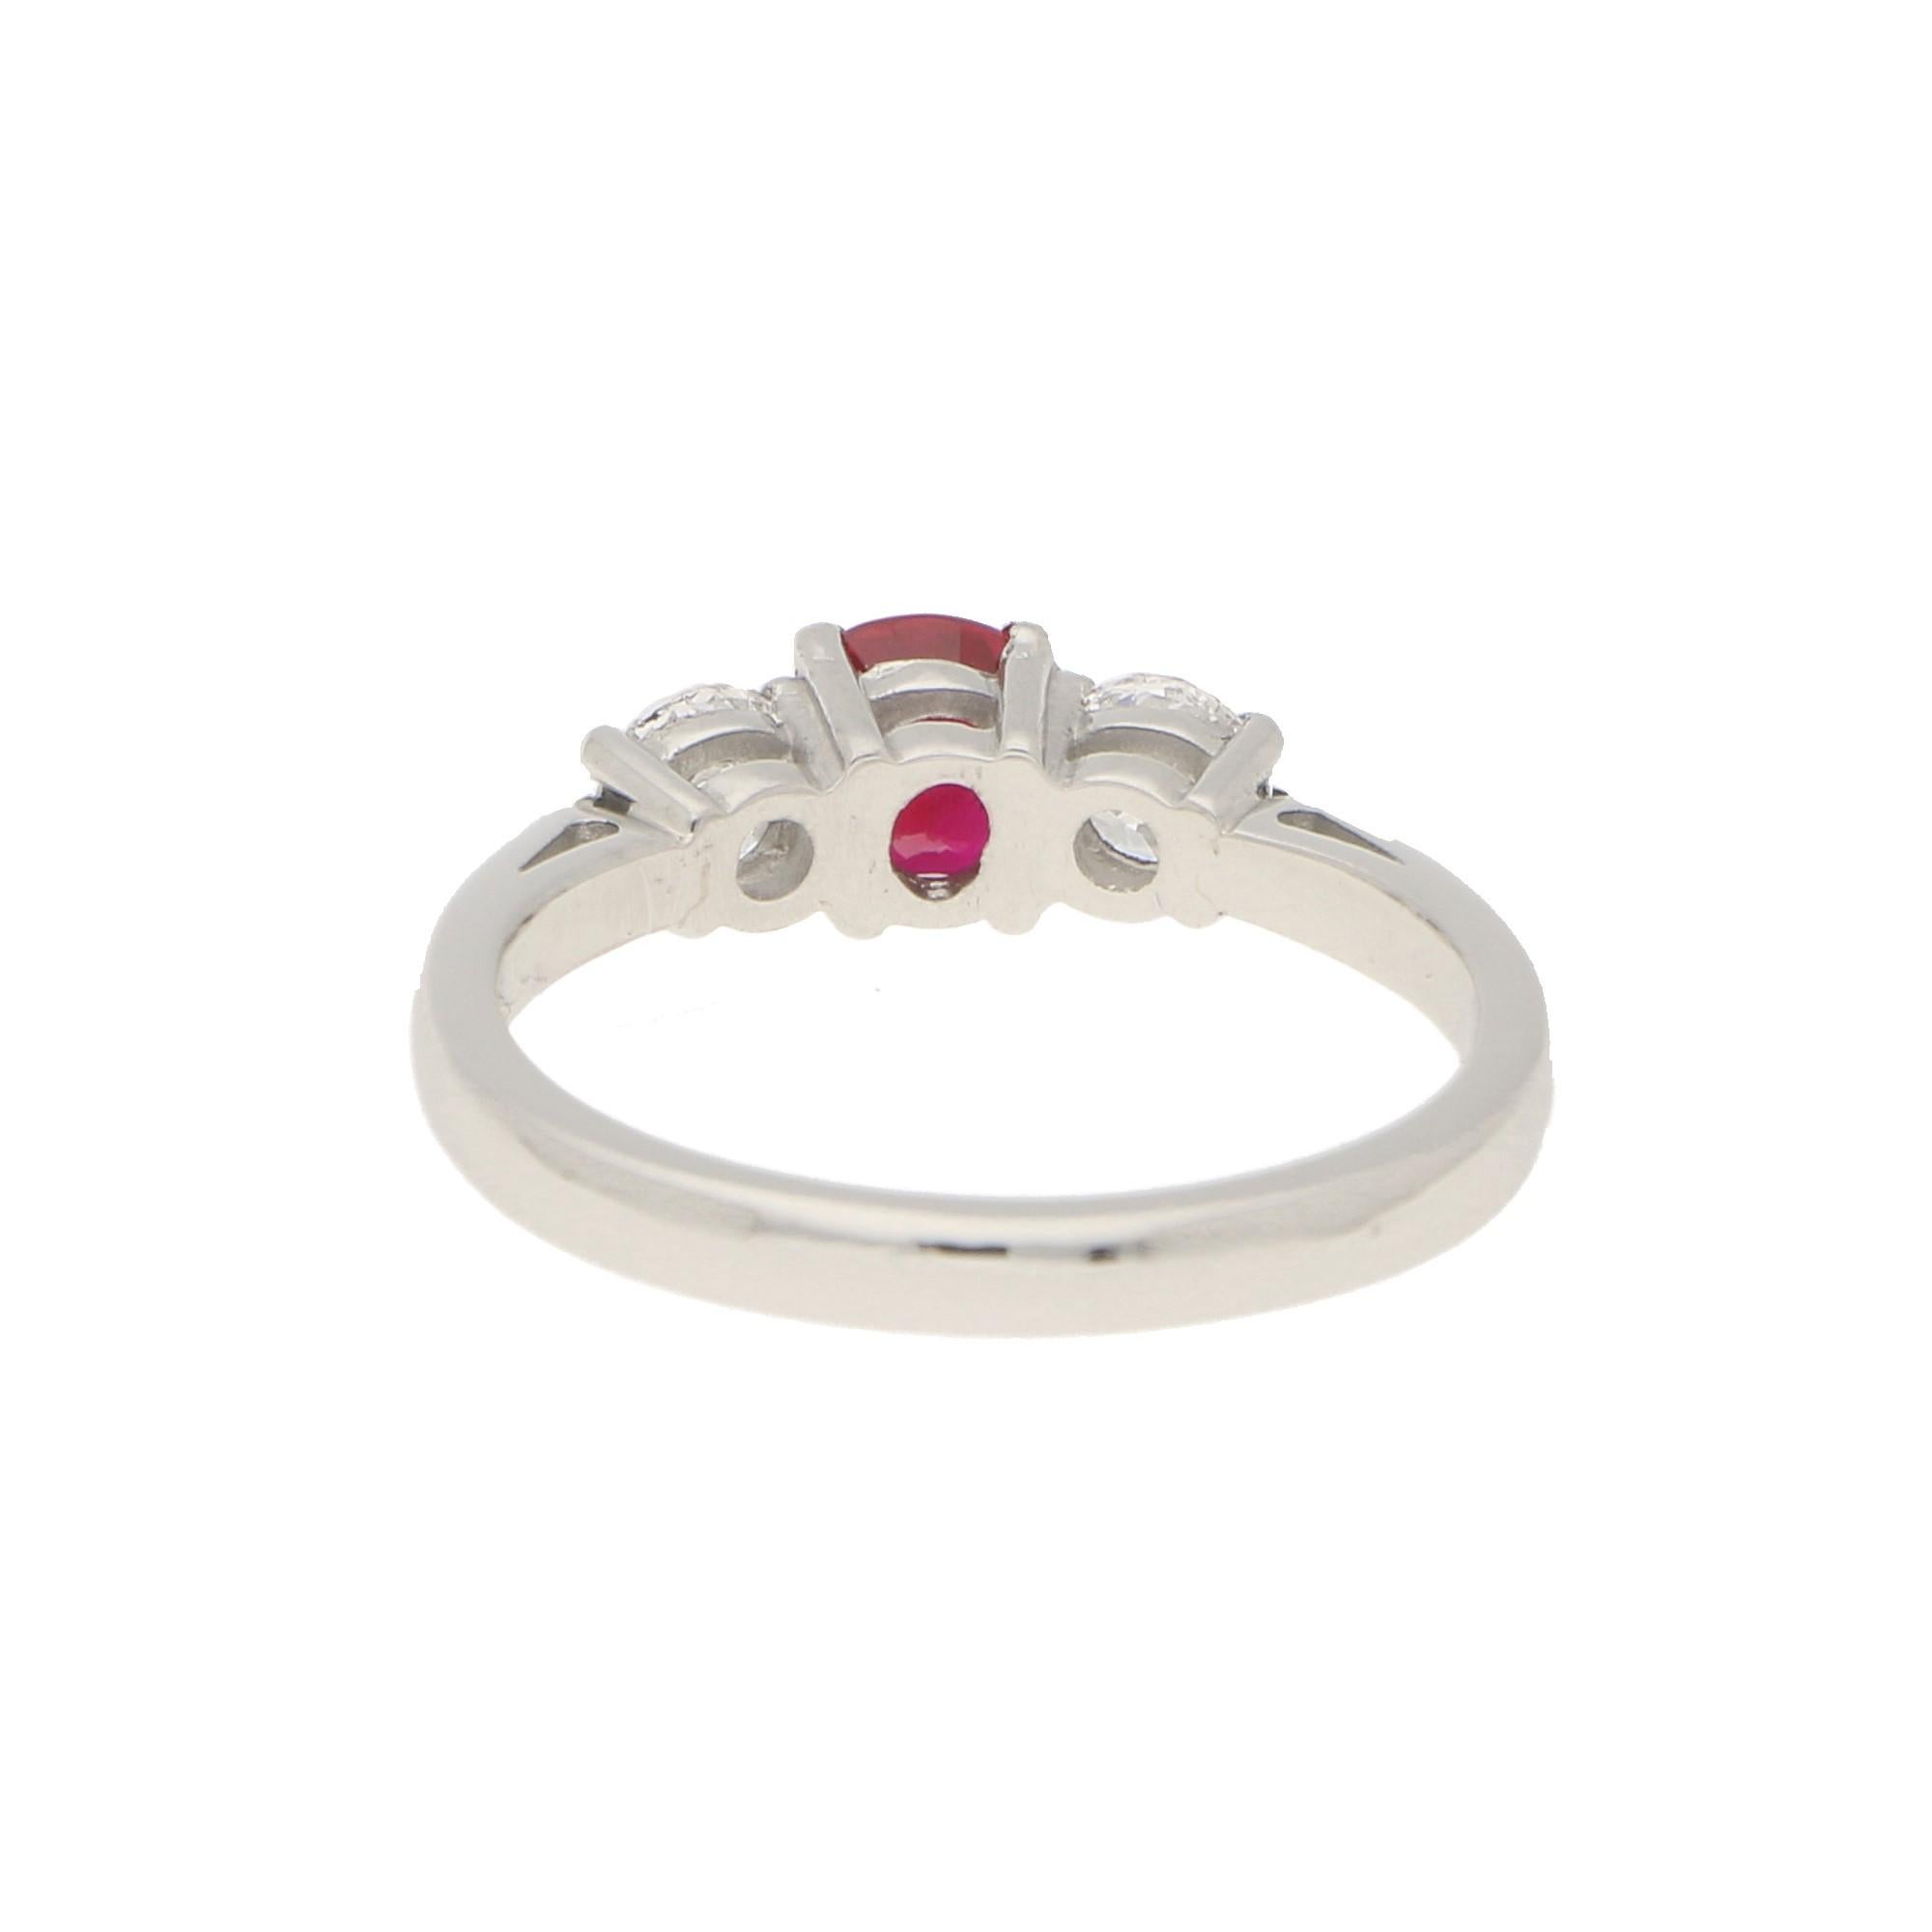 A beautiful ruby and diamond trilogy engagement ring set in 18k white gold. This classic design is centrally set with a cushion cut ruby four claw set in an open back triple setting. The vibrant red ruby is then flanked to each side by two sparkly